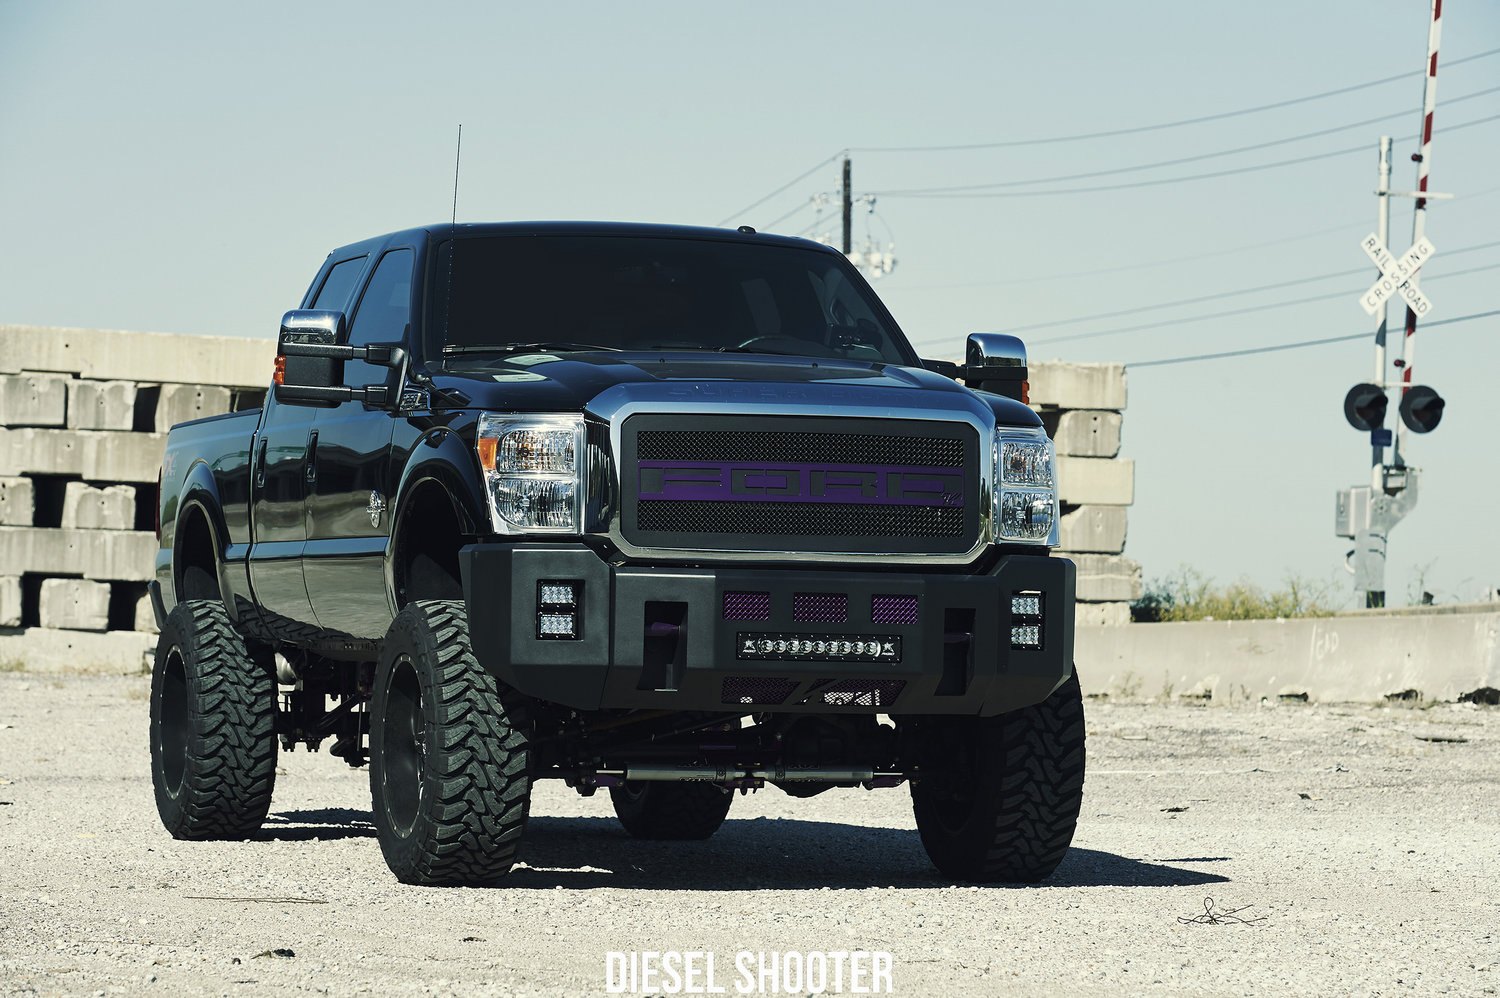 Front Bumper with Rigid Lighting on Ford F-250 - Photo by Diesel Shooter